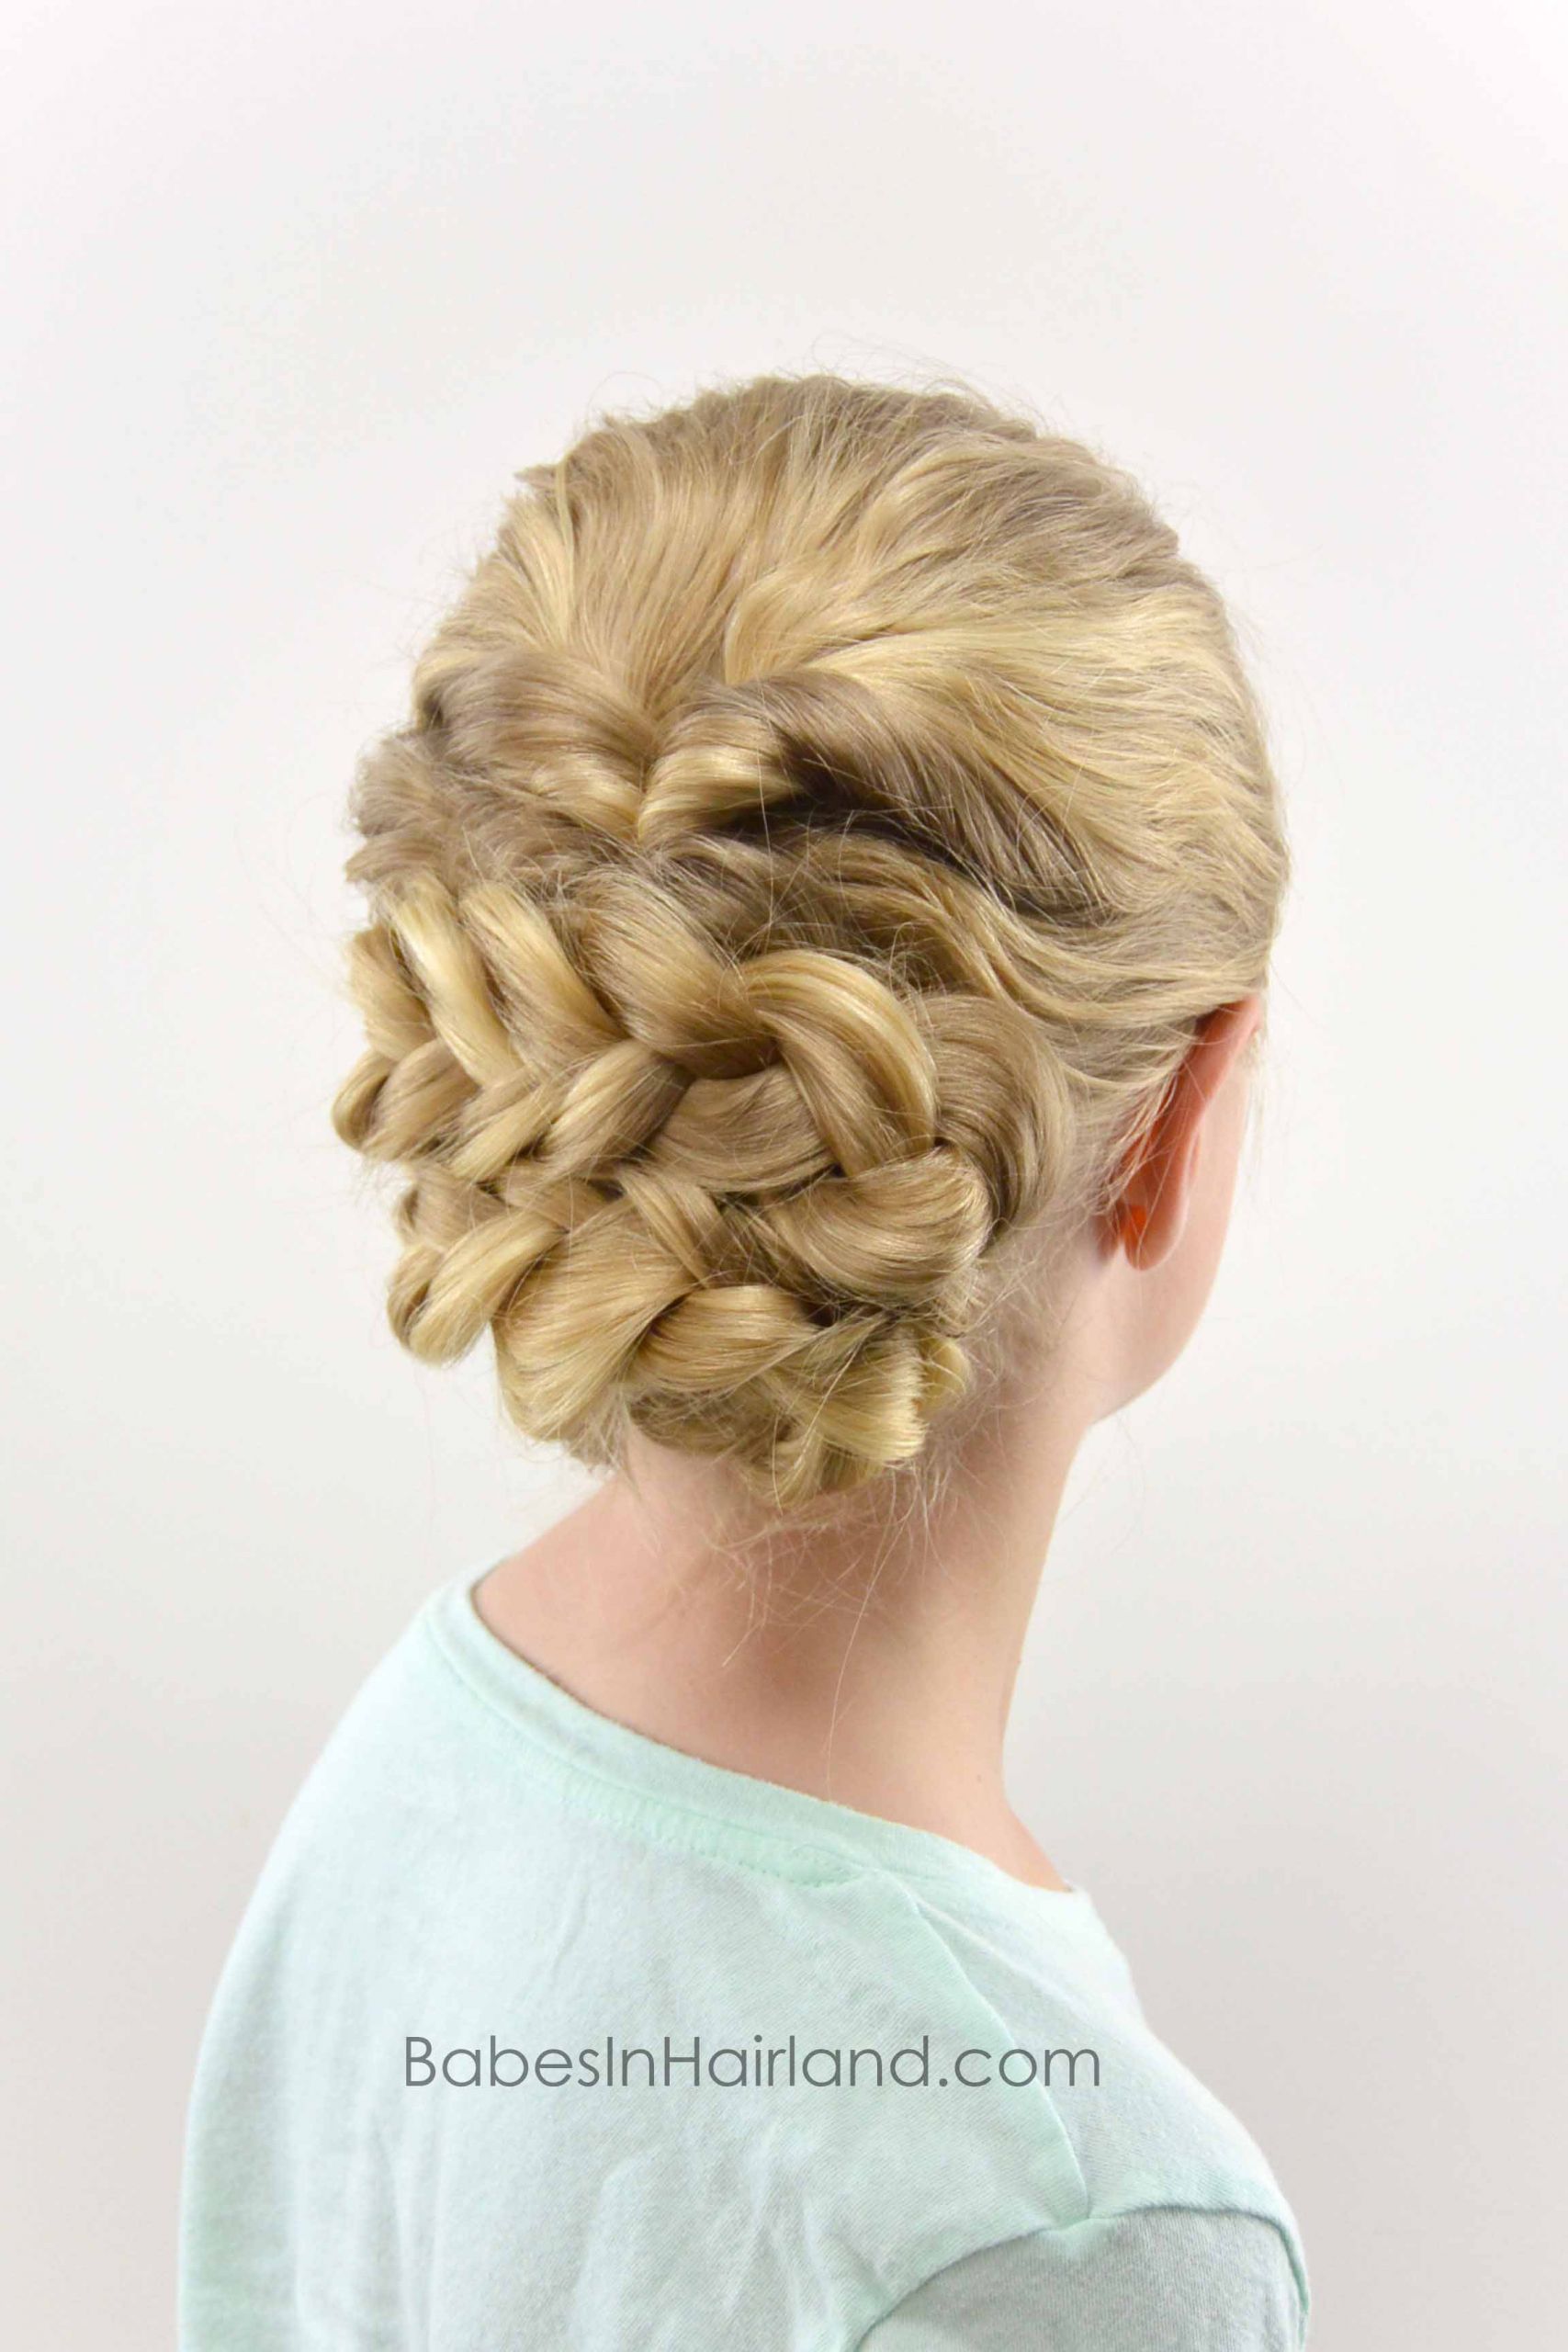 Hairstyle Updo Braid
 Easy Romantic Braided Updo Babes In Hairland